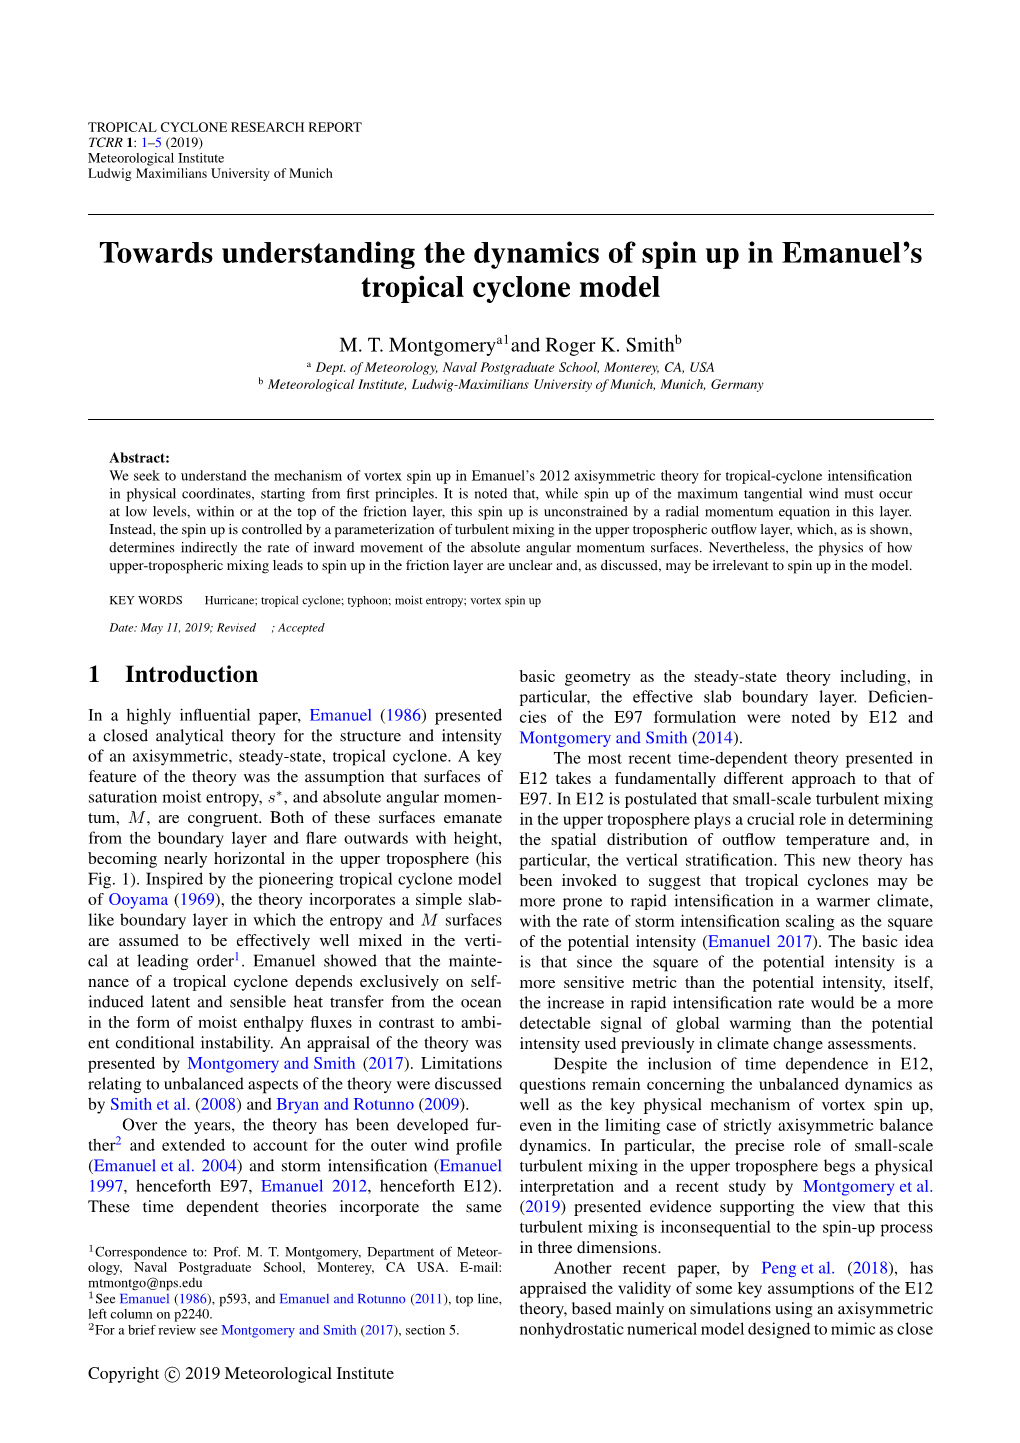 Towards Understanding the Dynamics of Spin up in Emanuel's Tropical